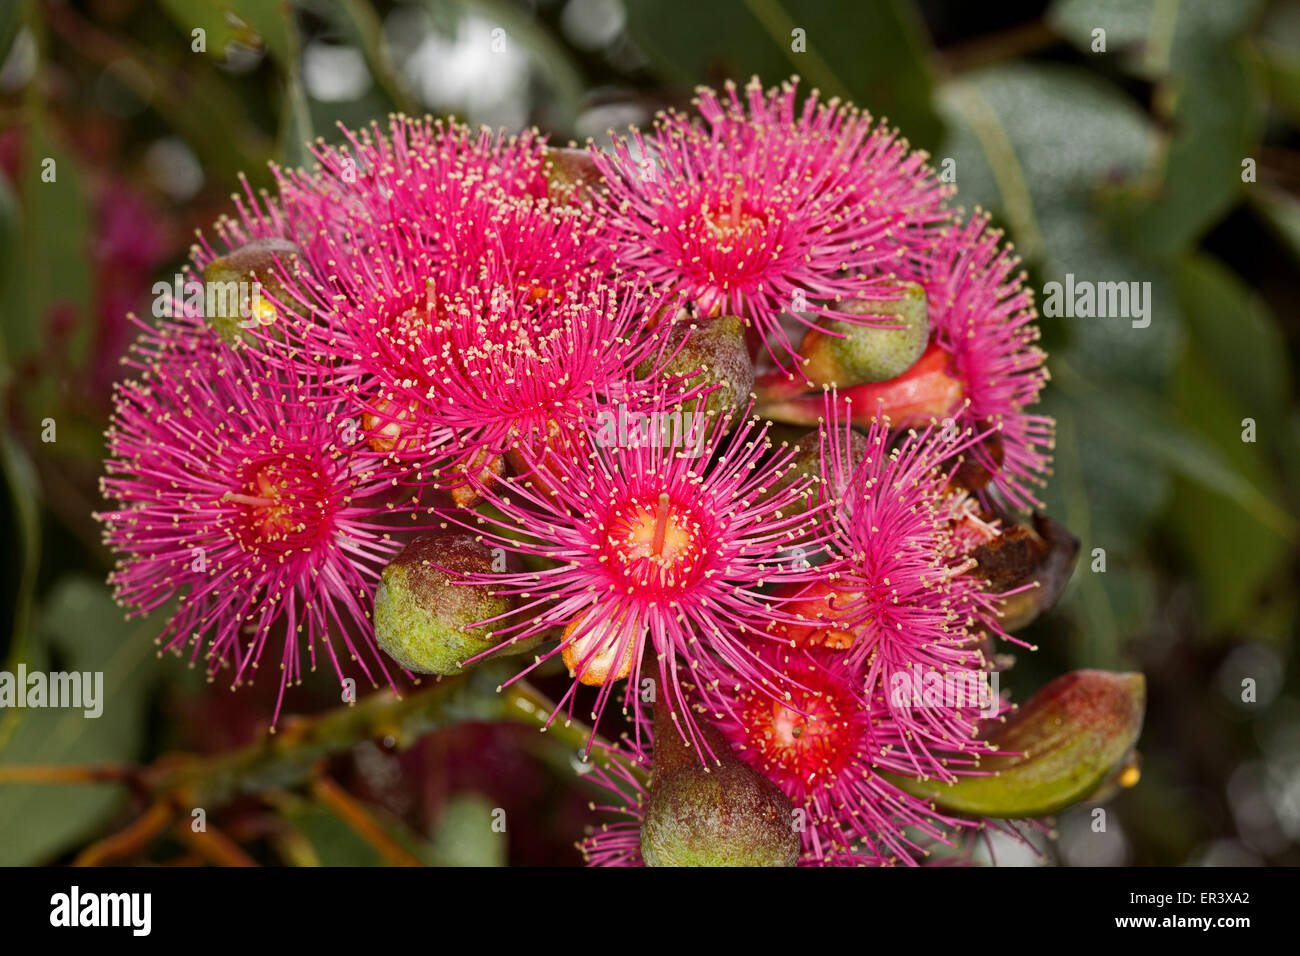 Large cluster of spectacular red flowers & buds of Australian native tree Corymbia / eucalyptus ficifolia with green leaves on dark background Stock Photo